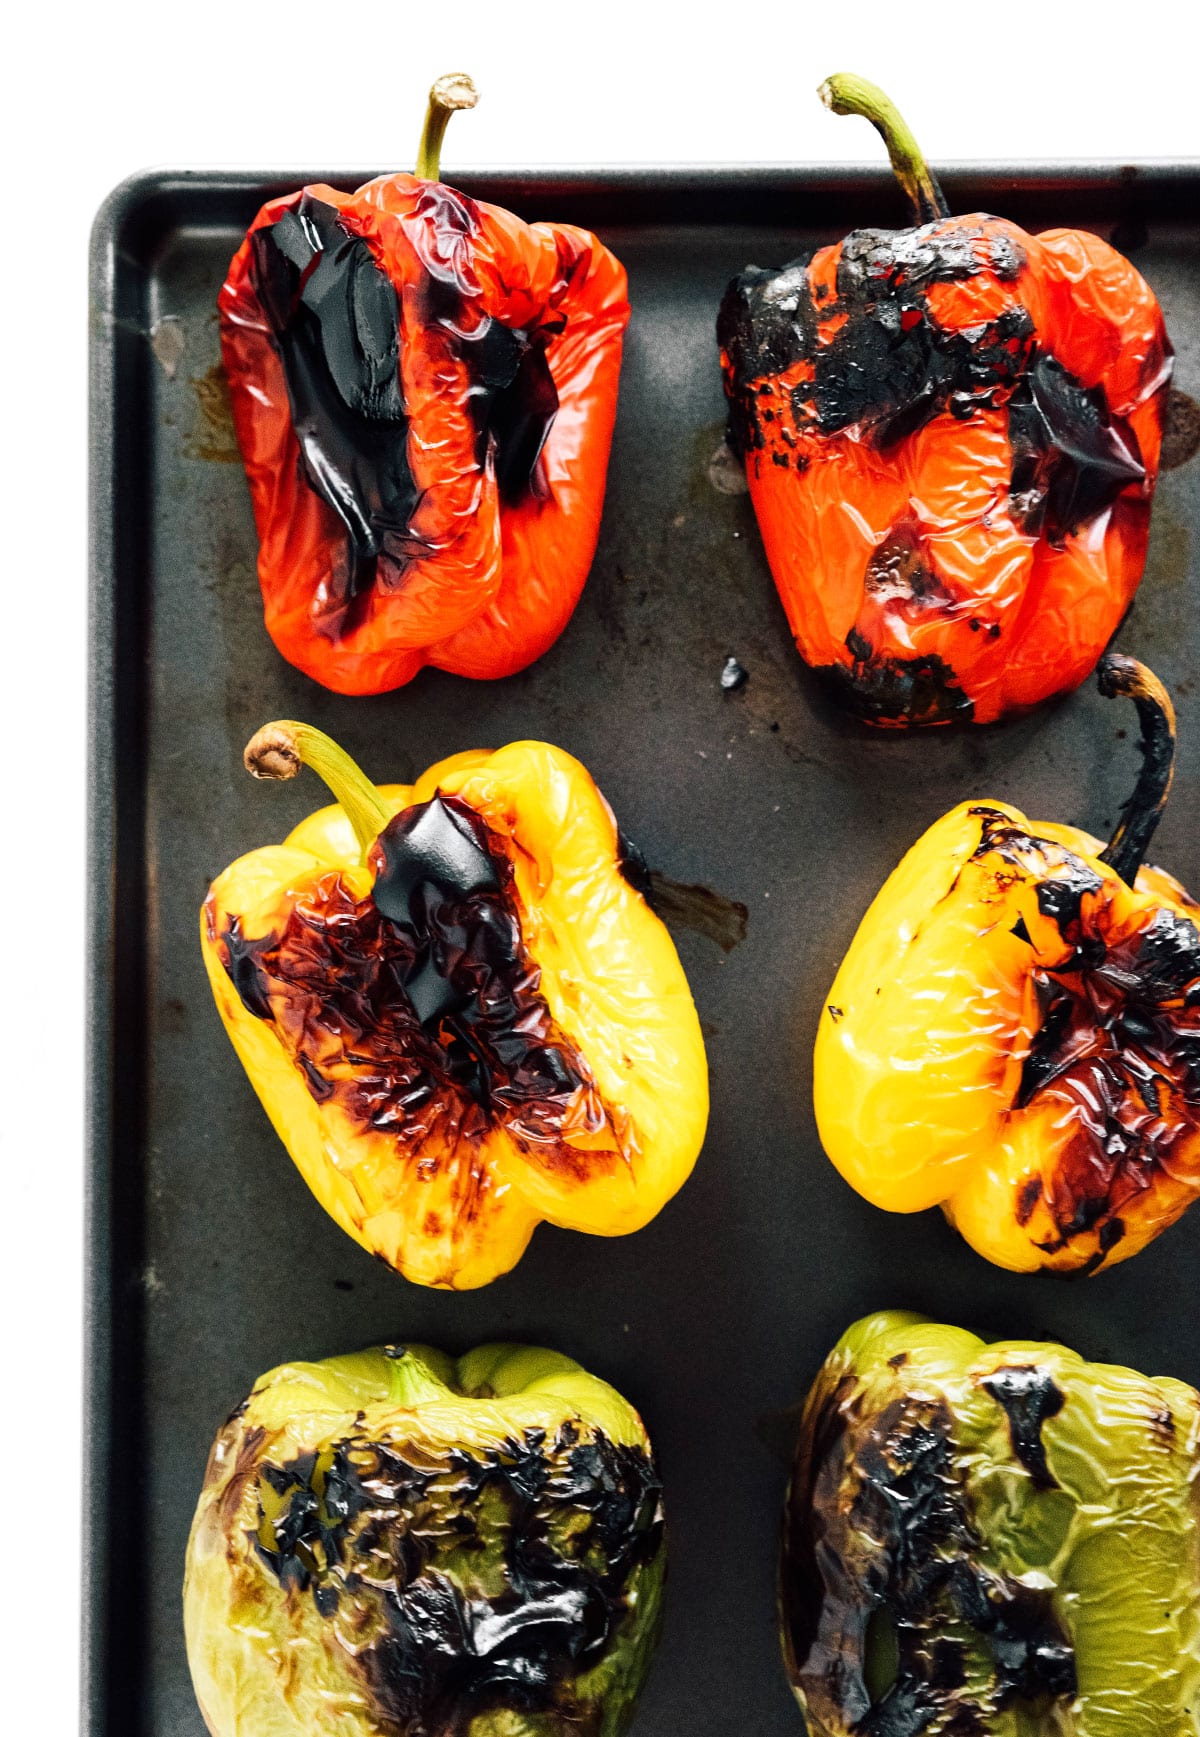 Roasted bell peppers on a baking tray.